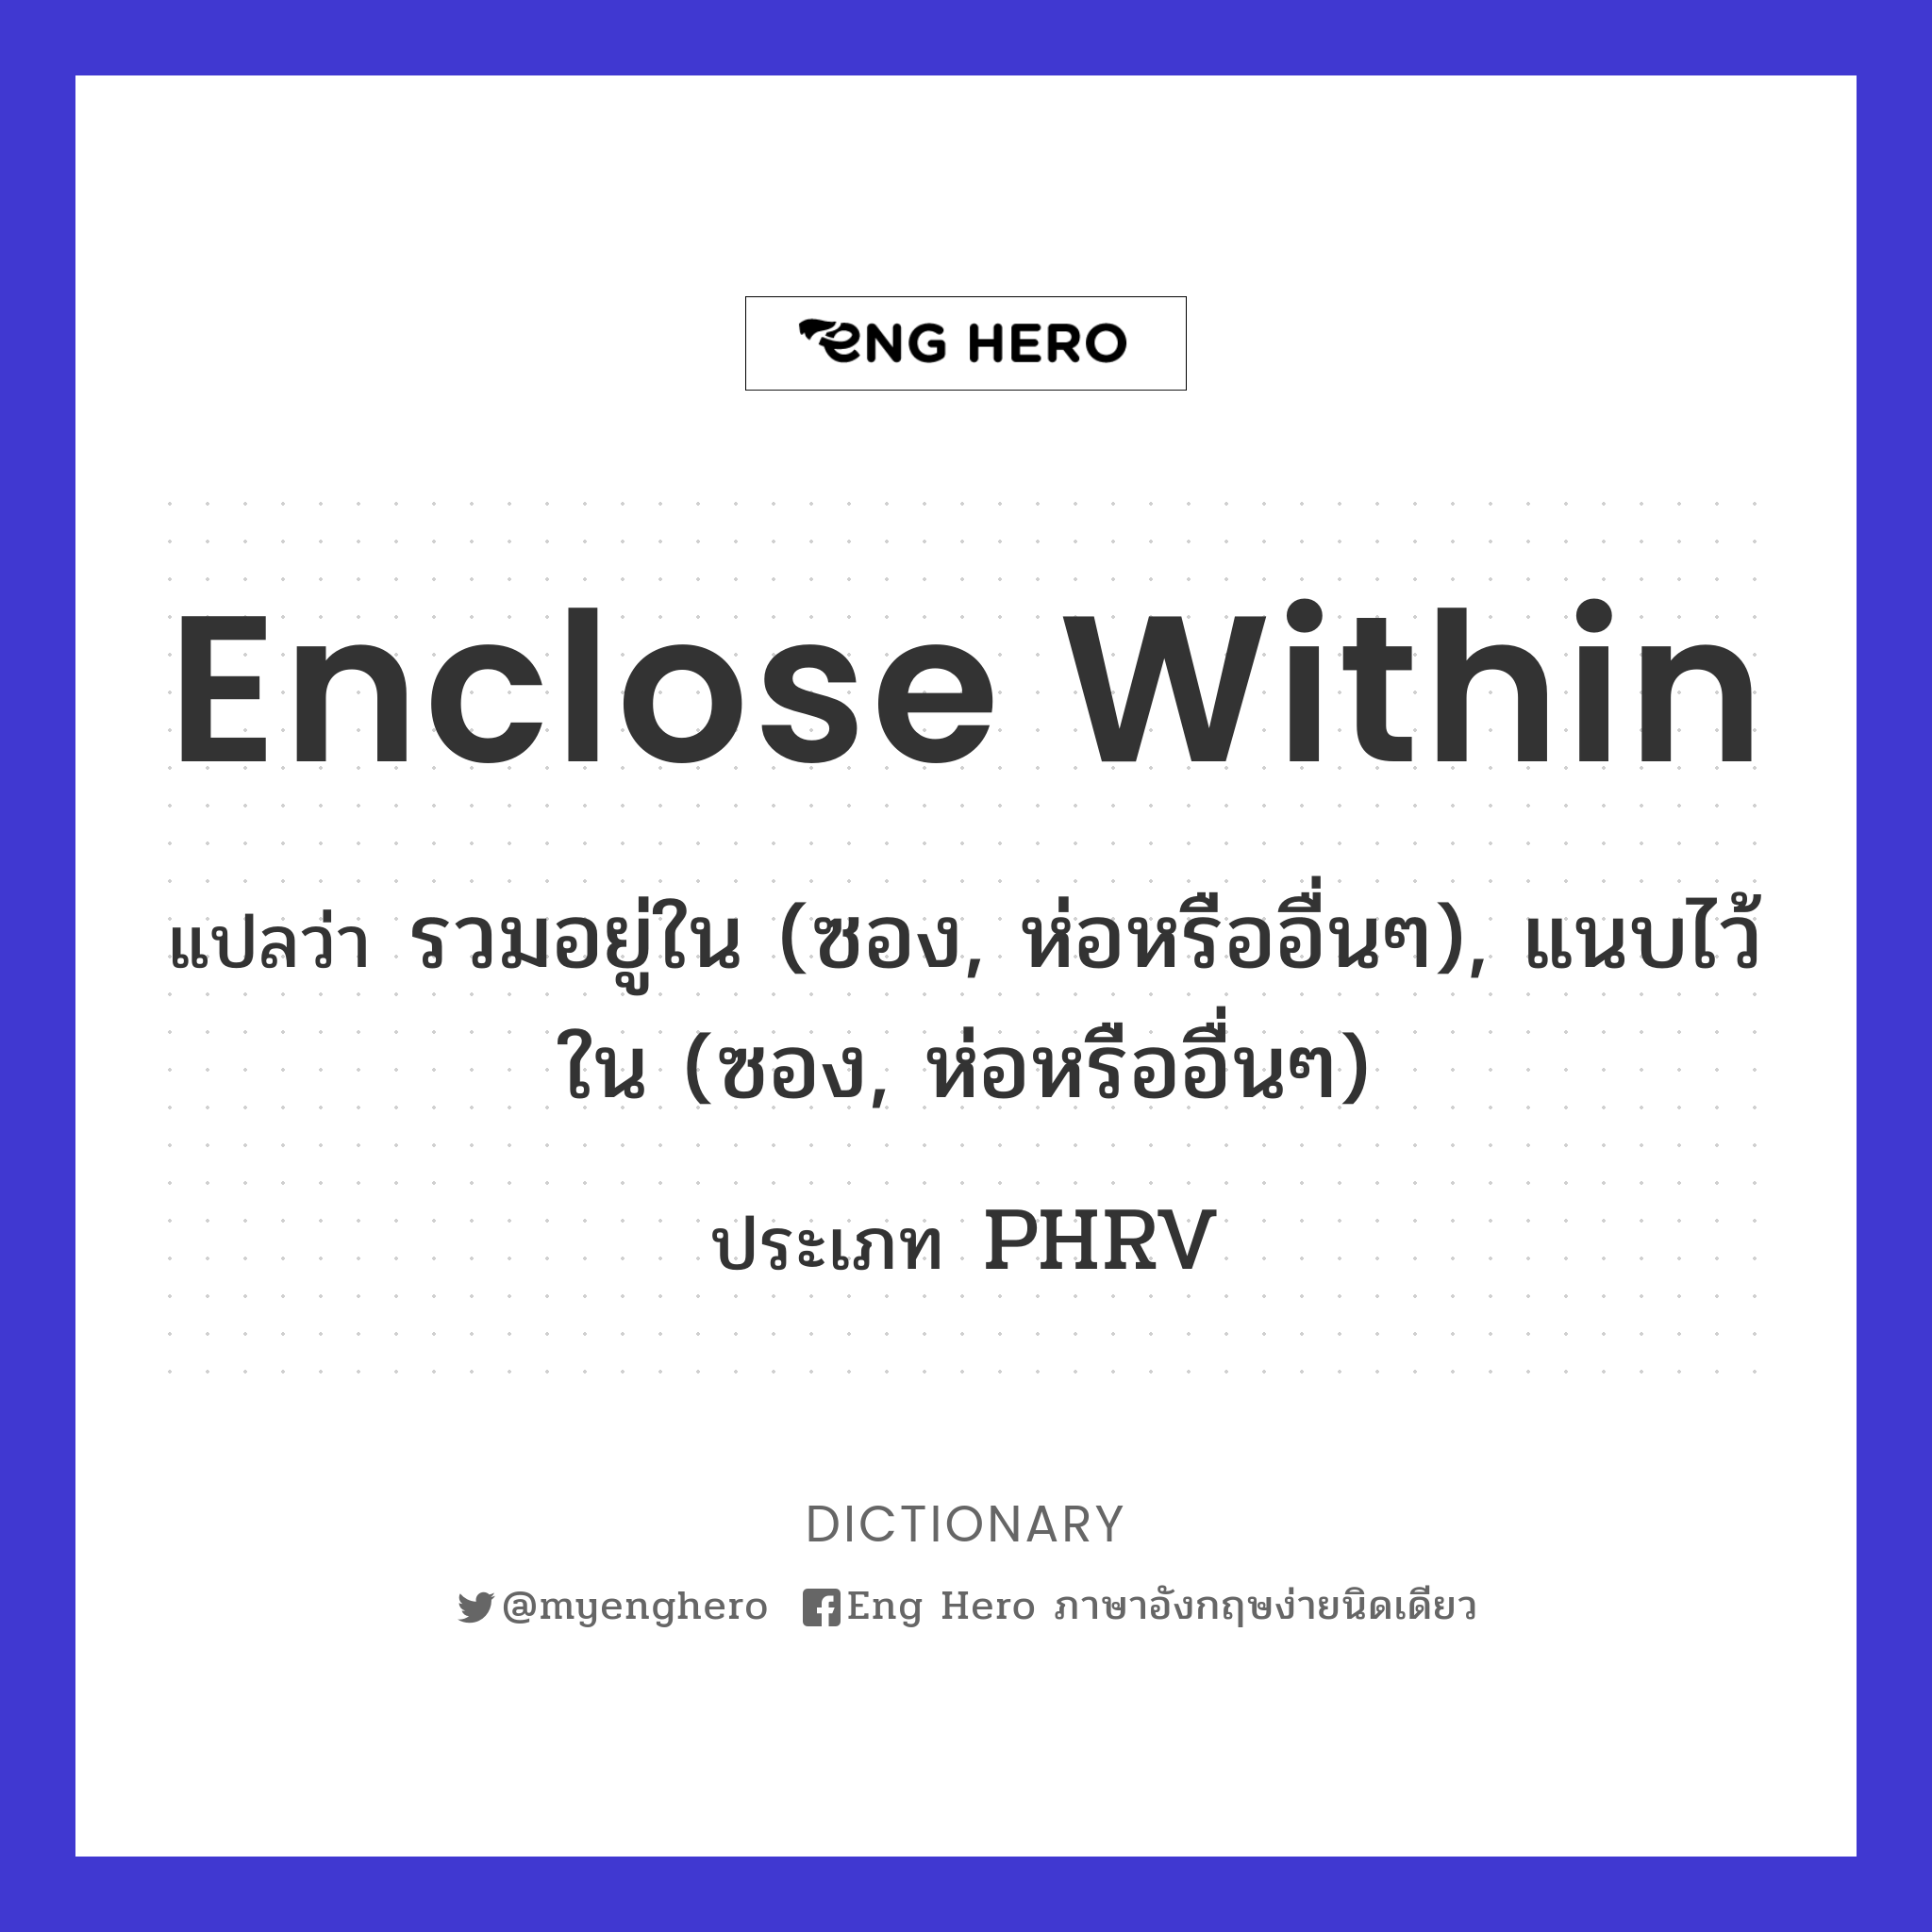 enclose within